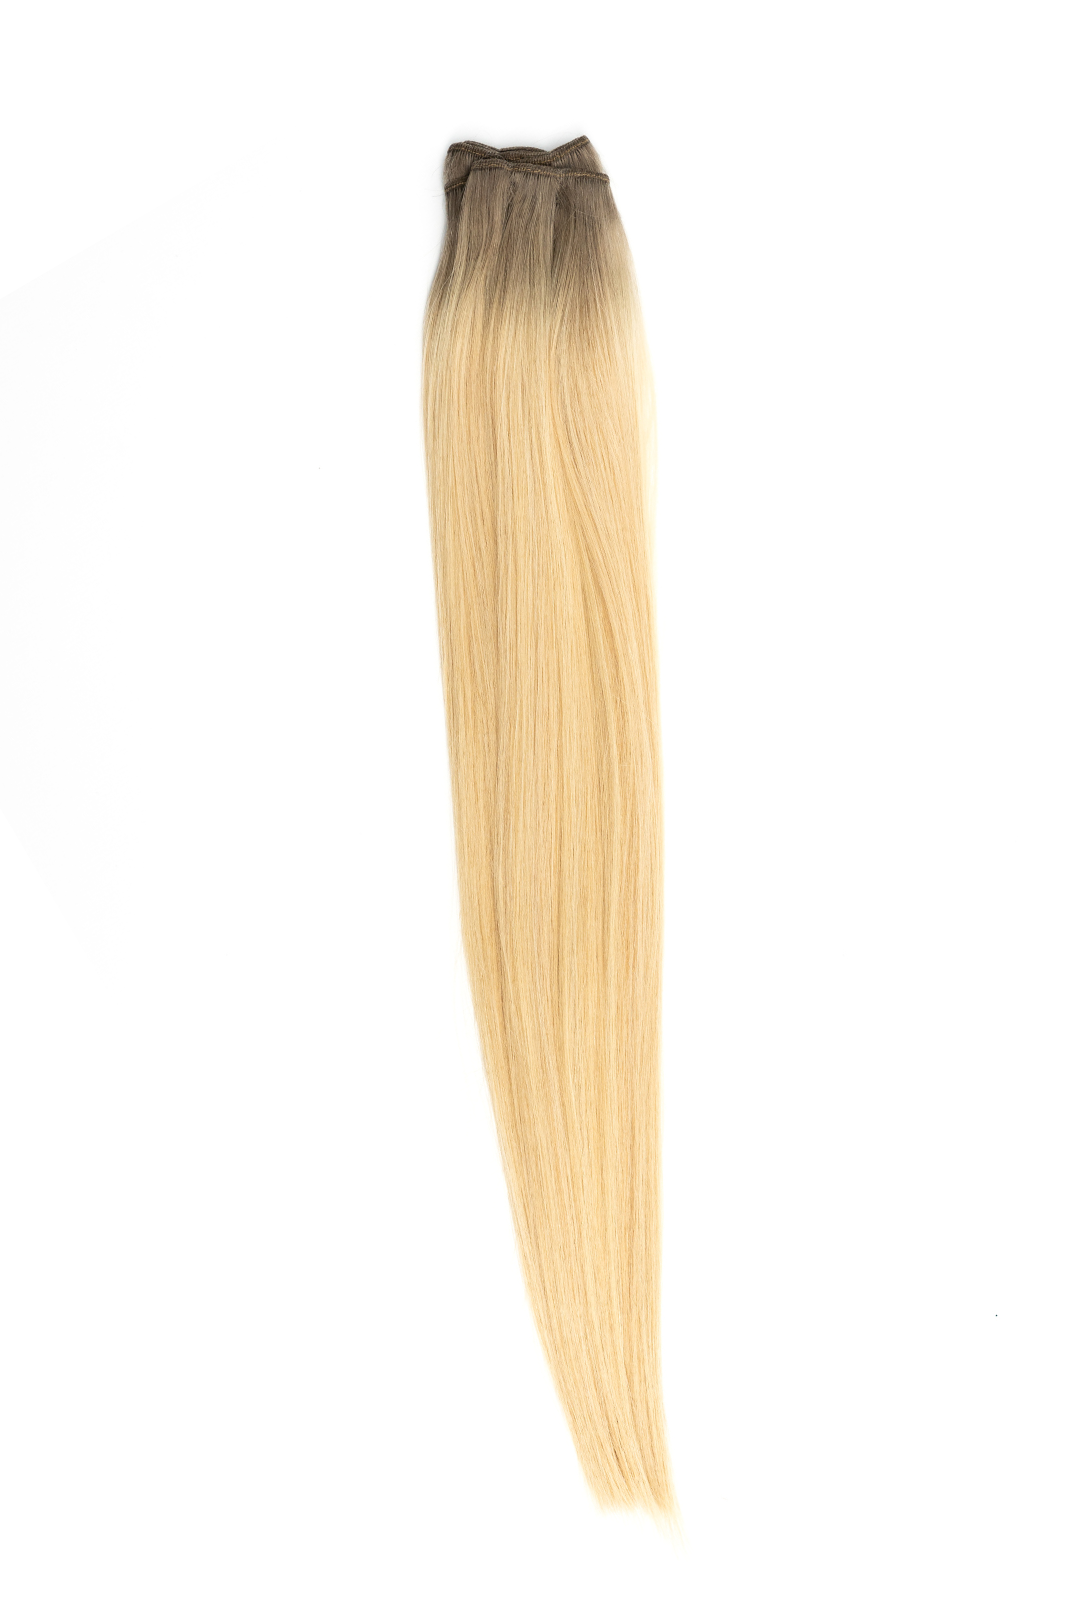 Laced Hair Machine Sewn Weft Extensions Rooted #8/D16/22 (Rooted Buttercream)